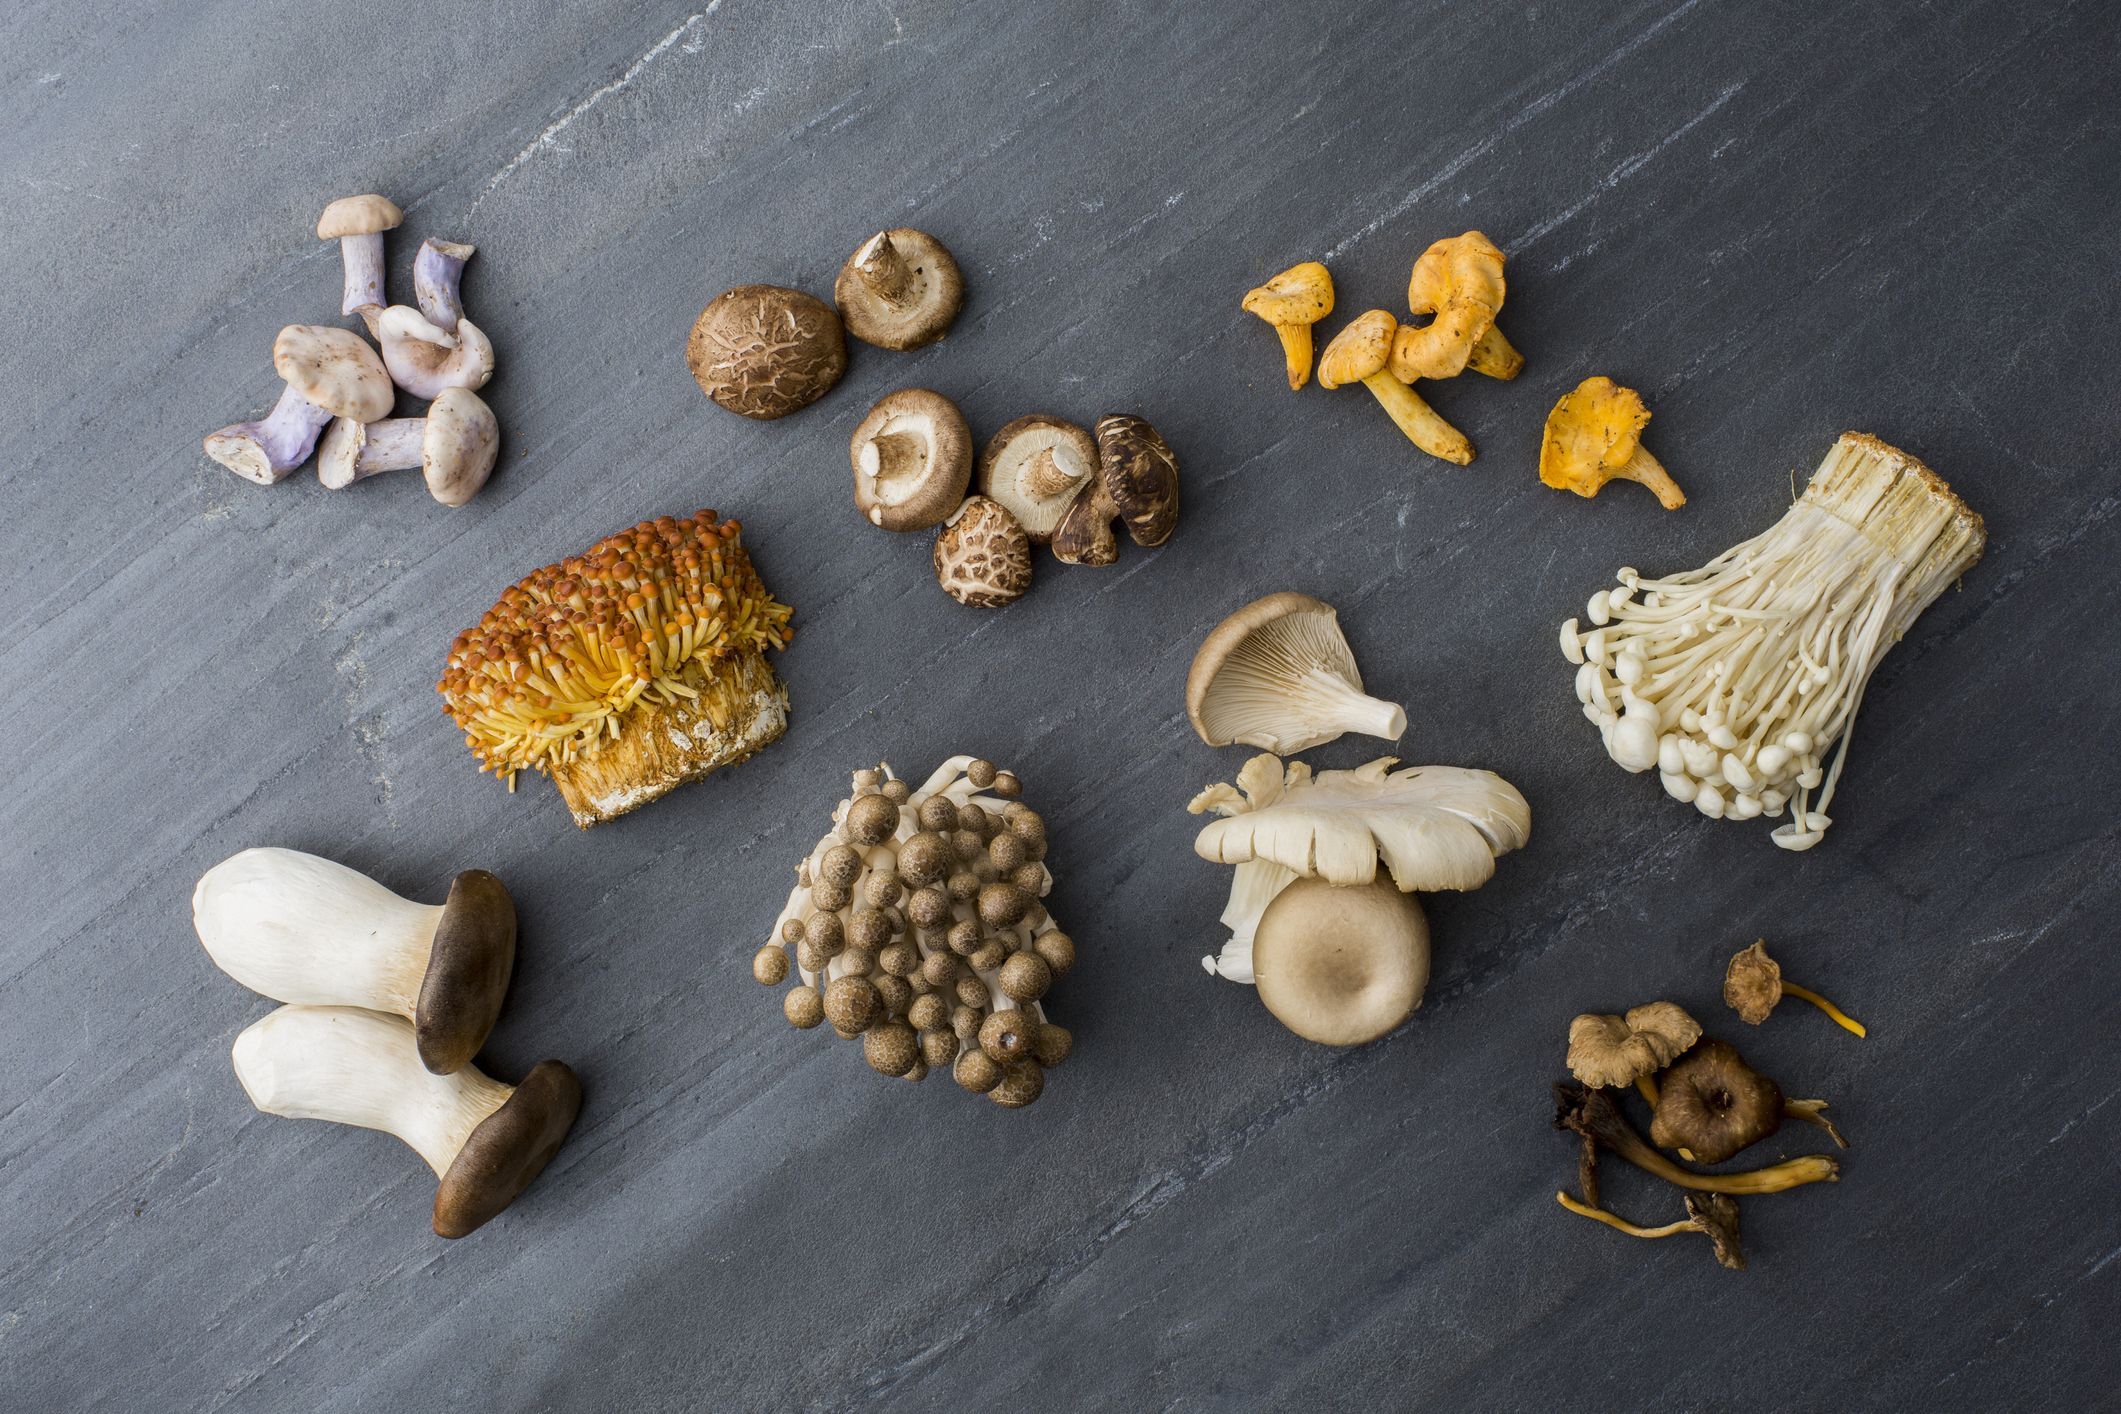 12 Different Types Of Mushrooms - Most Common Kinds Of Edible Mushrooms